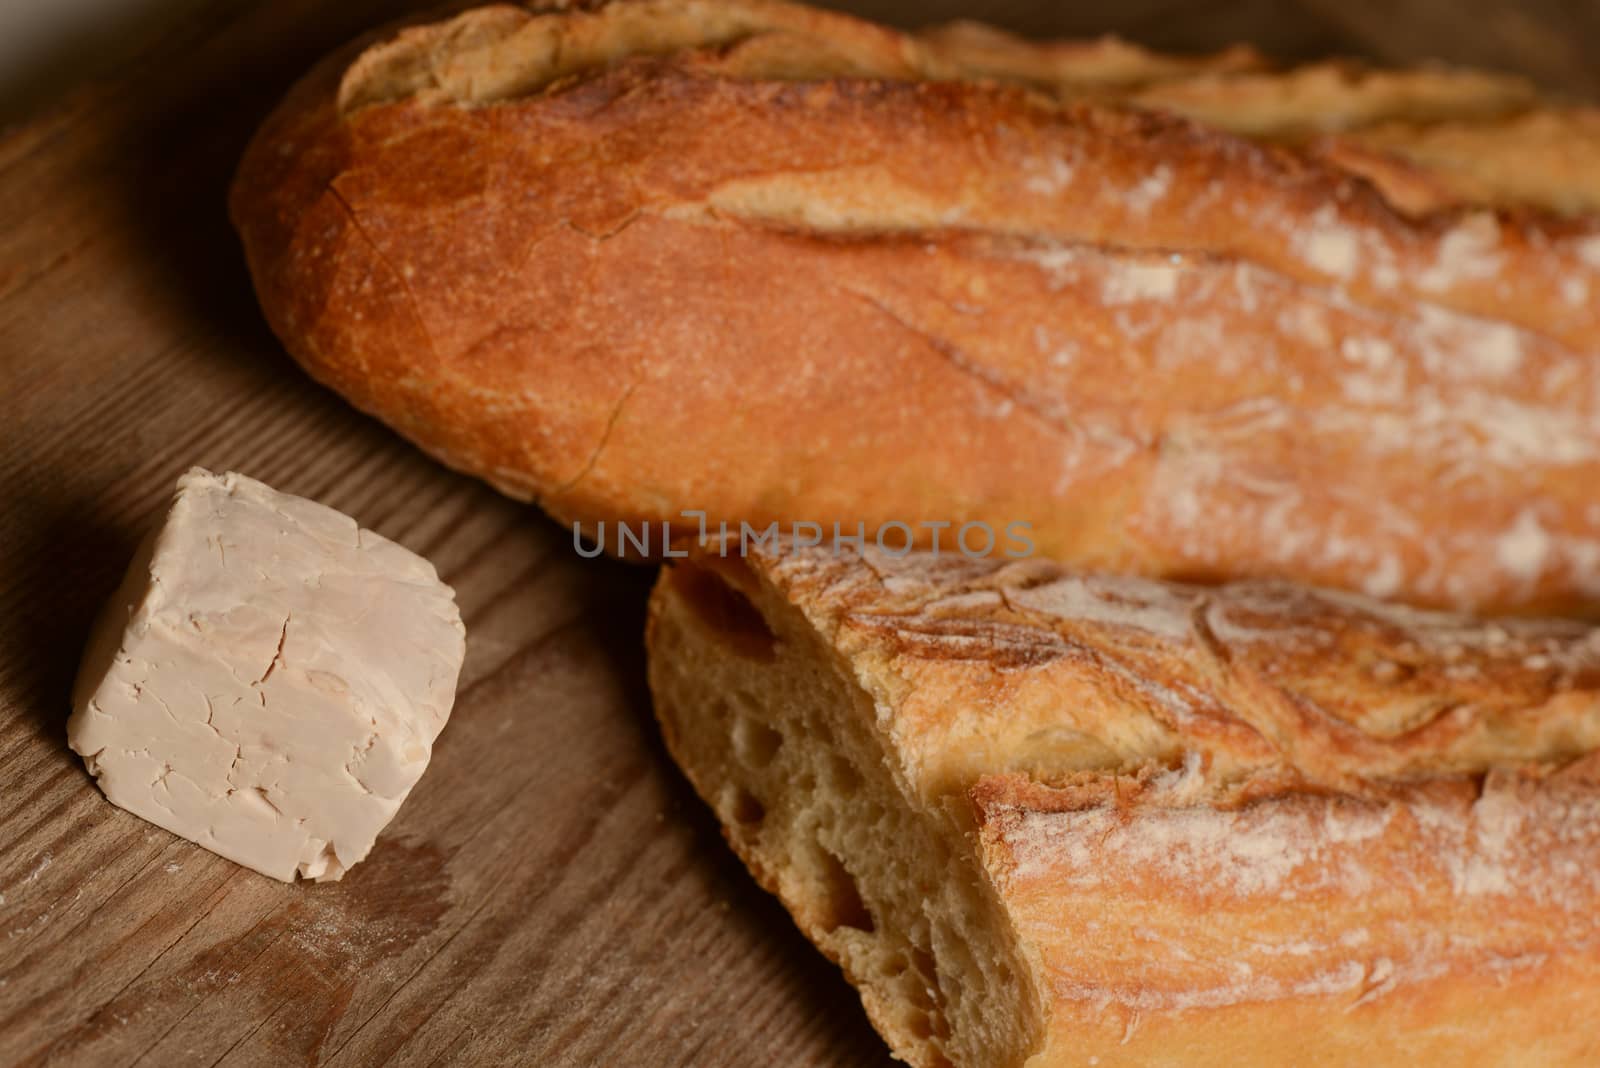 Yeast and bread on wood by FreeProd